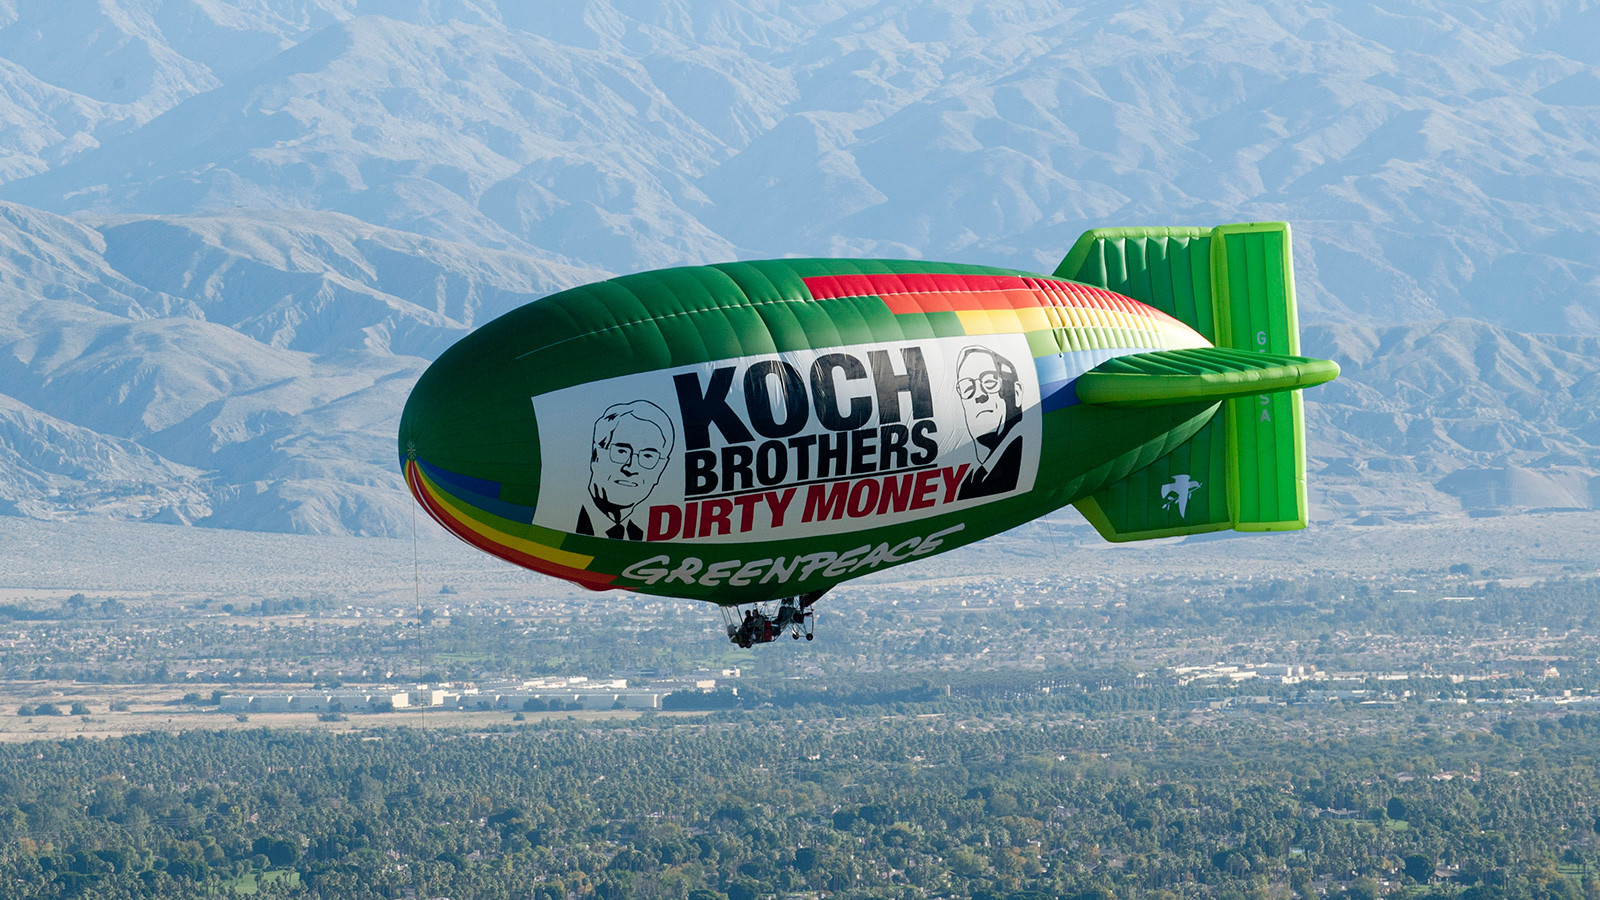 The Greenpeace Airship A.E. Bates flies over the location of oil billionaires David and Charles Koch's latest secret political strategy meeting, with a banner reading 